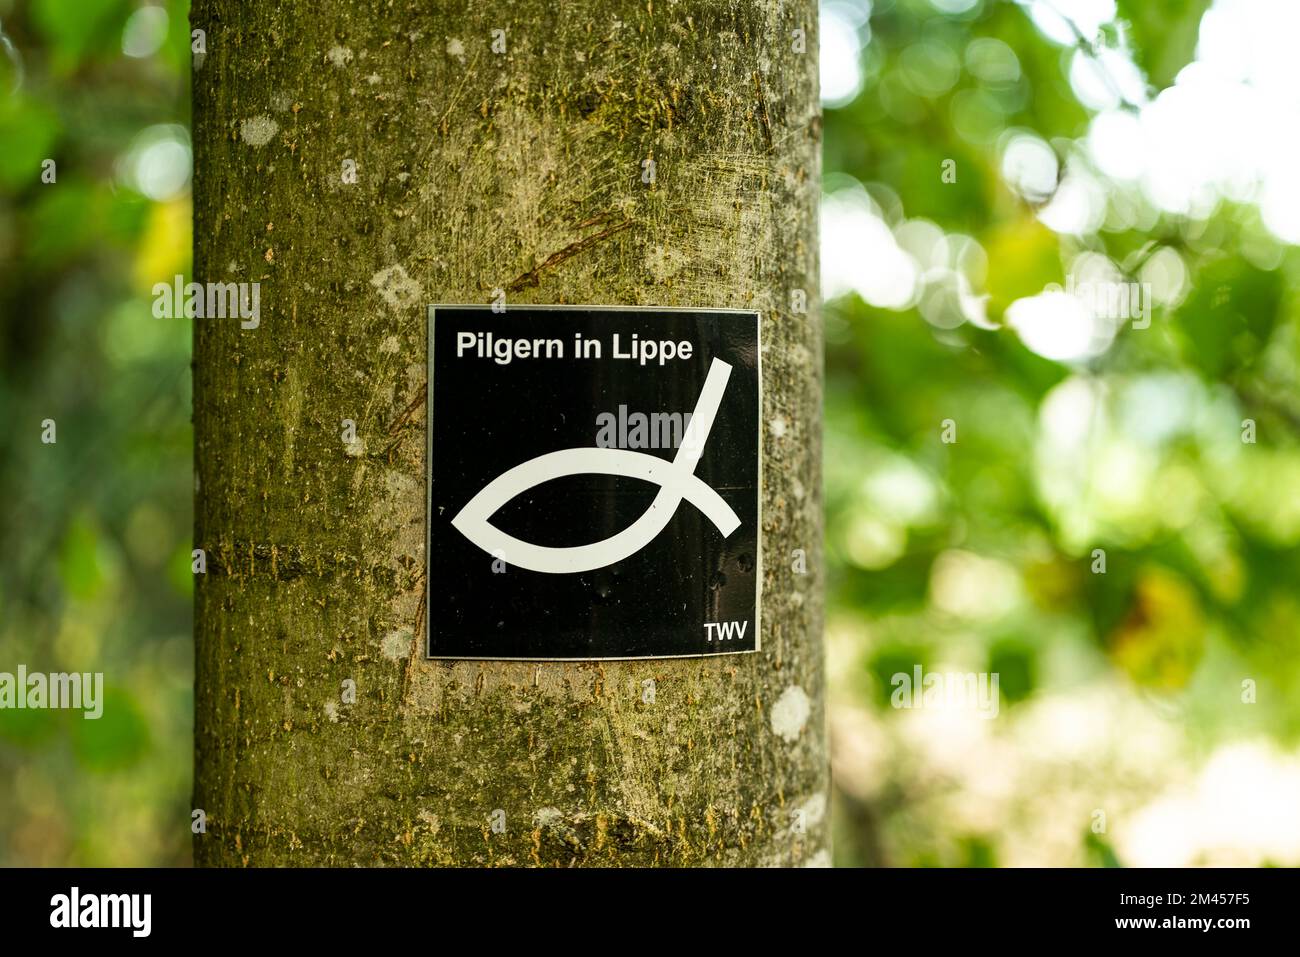 Trail marker signs for the “Pilgern in Lippe” long distance hiking trail on a tree, Teutoburg Forest, Germany Stock Photo